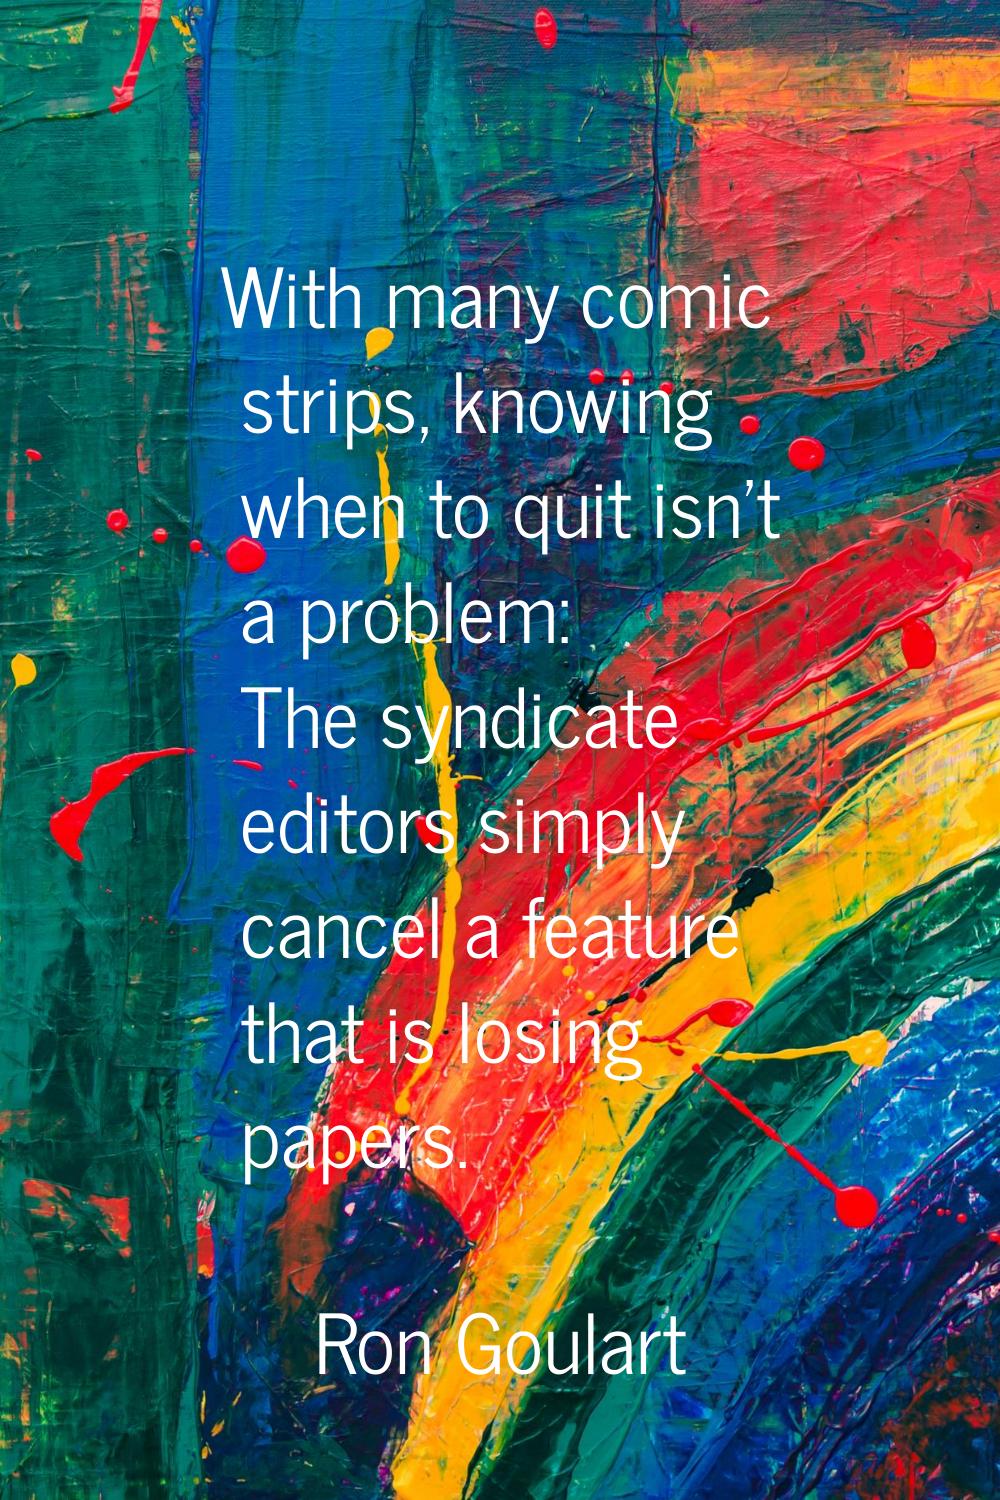 With many comic strips, knowing when to quit isn't a problem: The syndicate editors simply cancel a